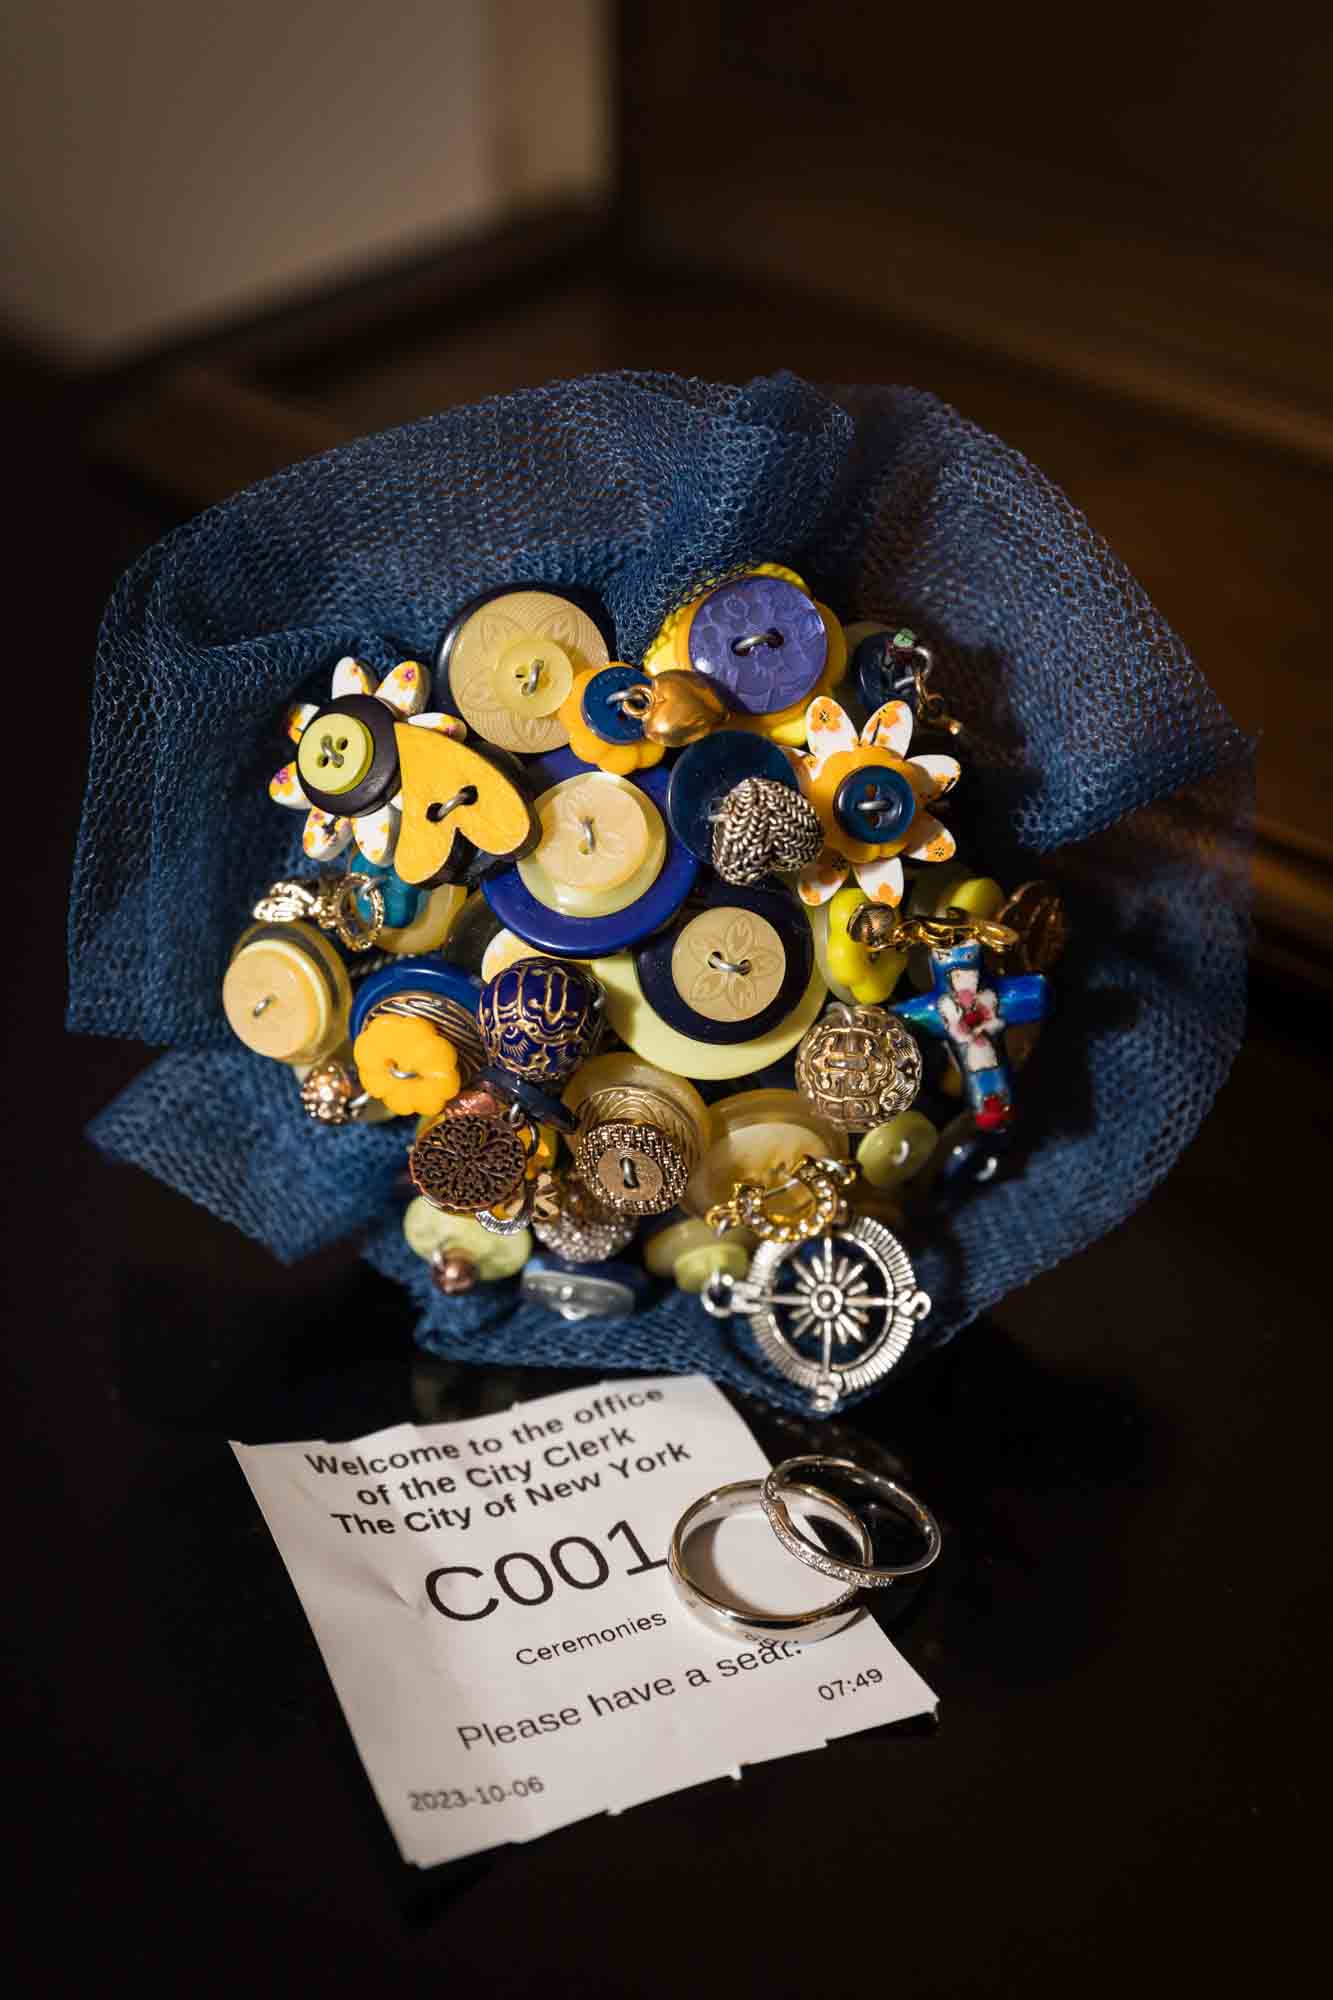 Button bouquet with blue tulle surrounding it, wedding rings, and strip of paper with numbers for an article on how to get a marriage license in San Antonio